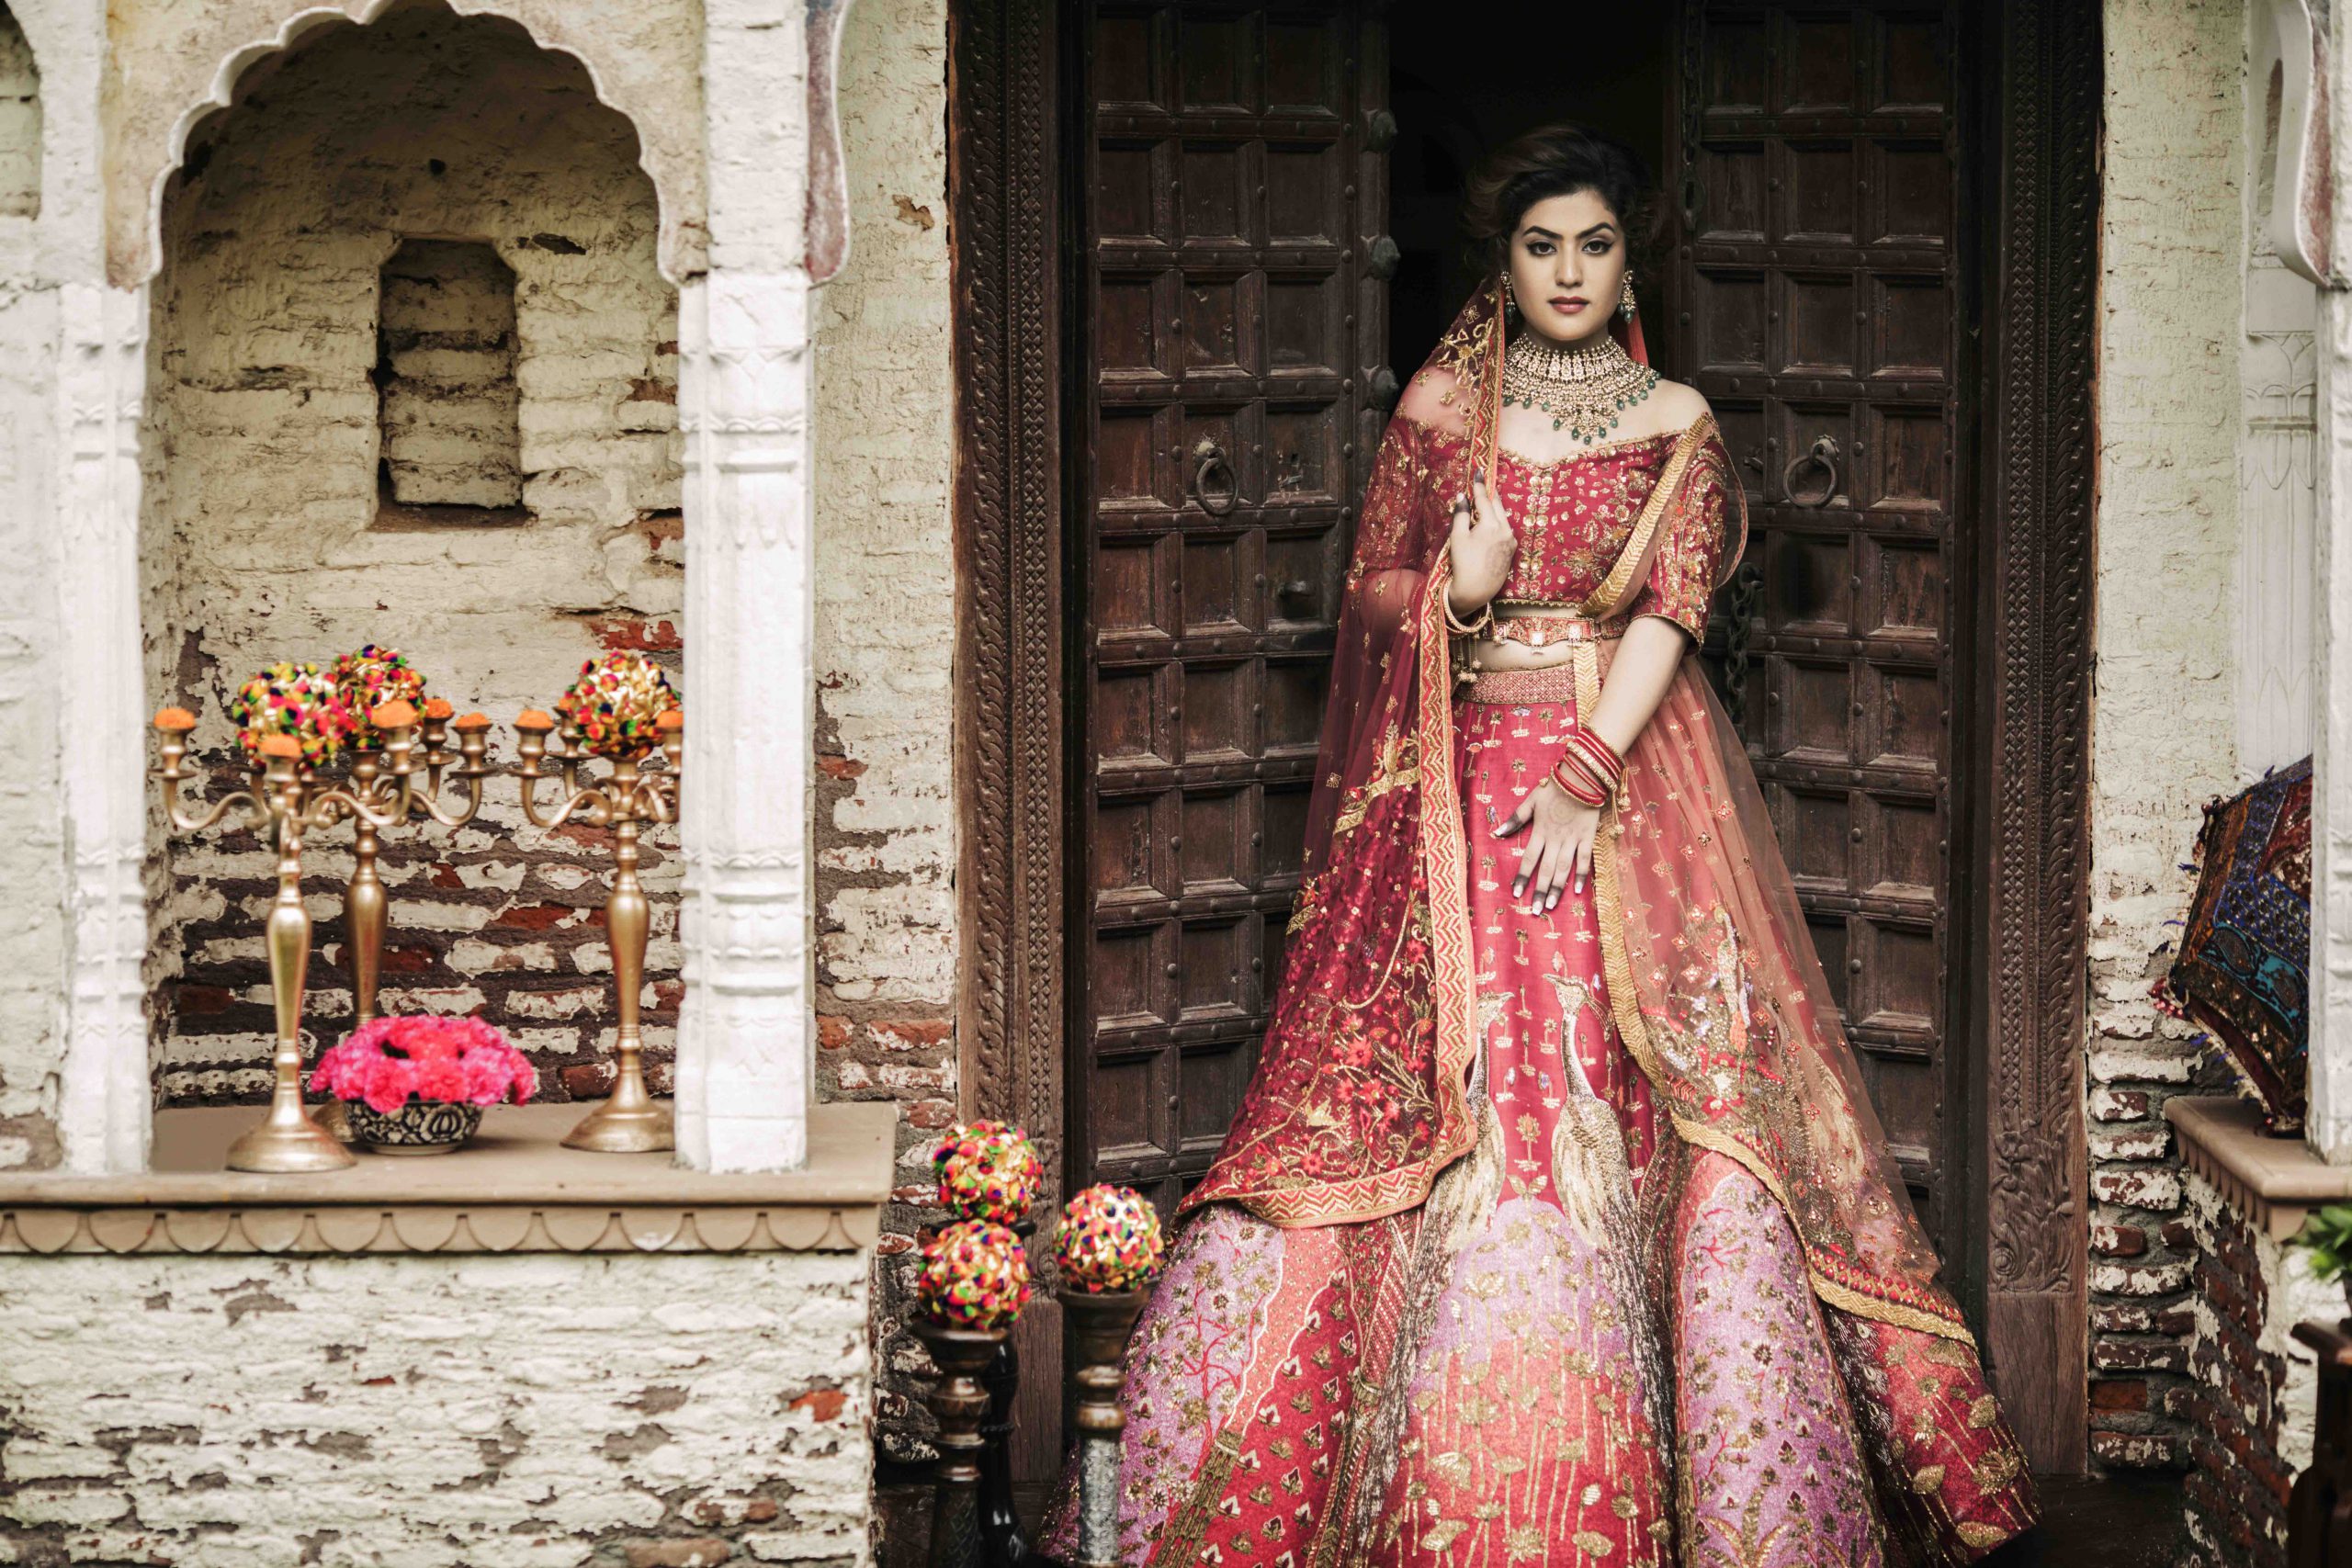 BRIDAL LEHENGAS FOR YOUR WEDDING DAY 2